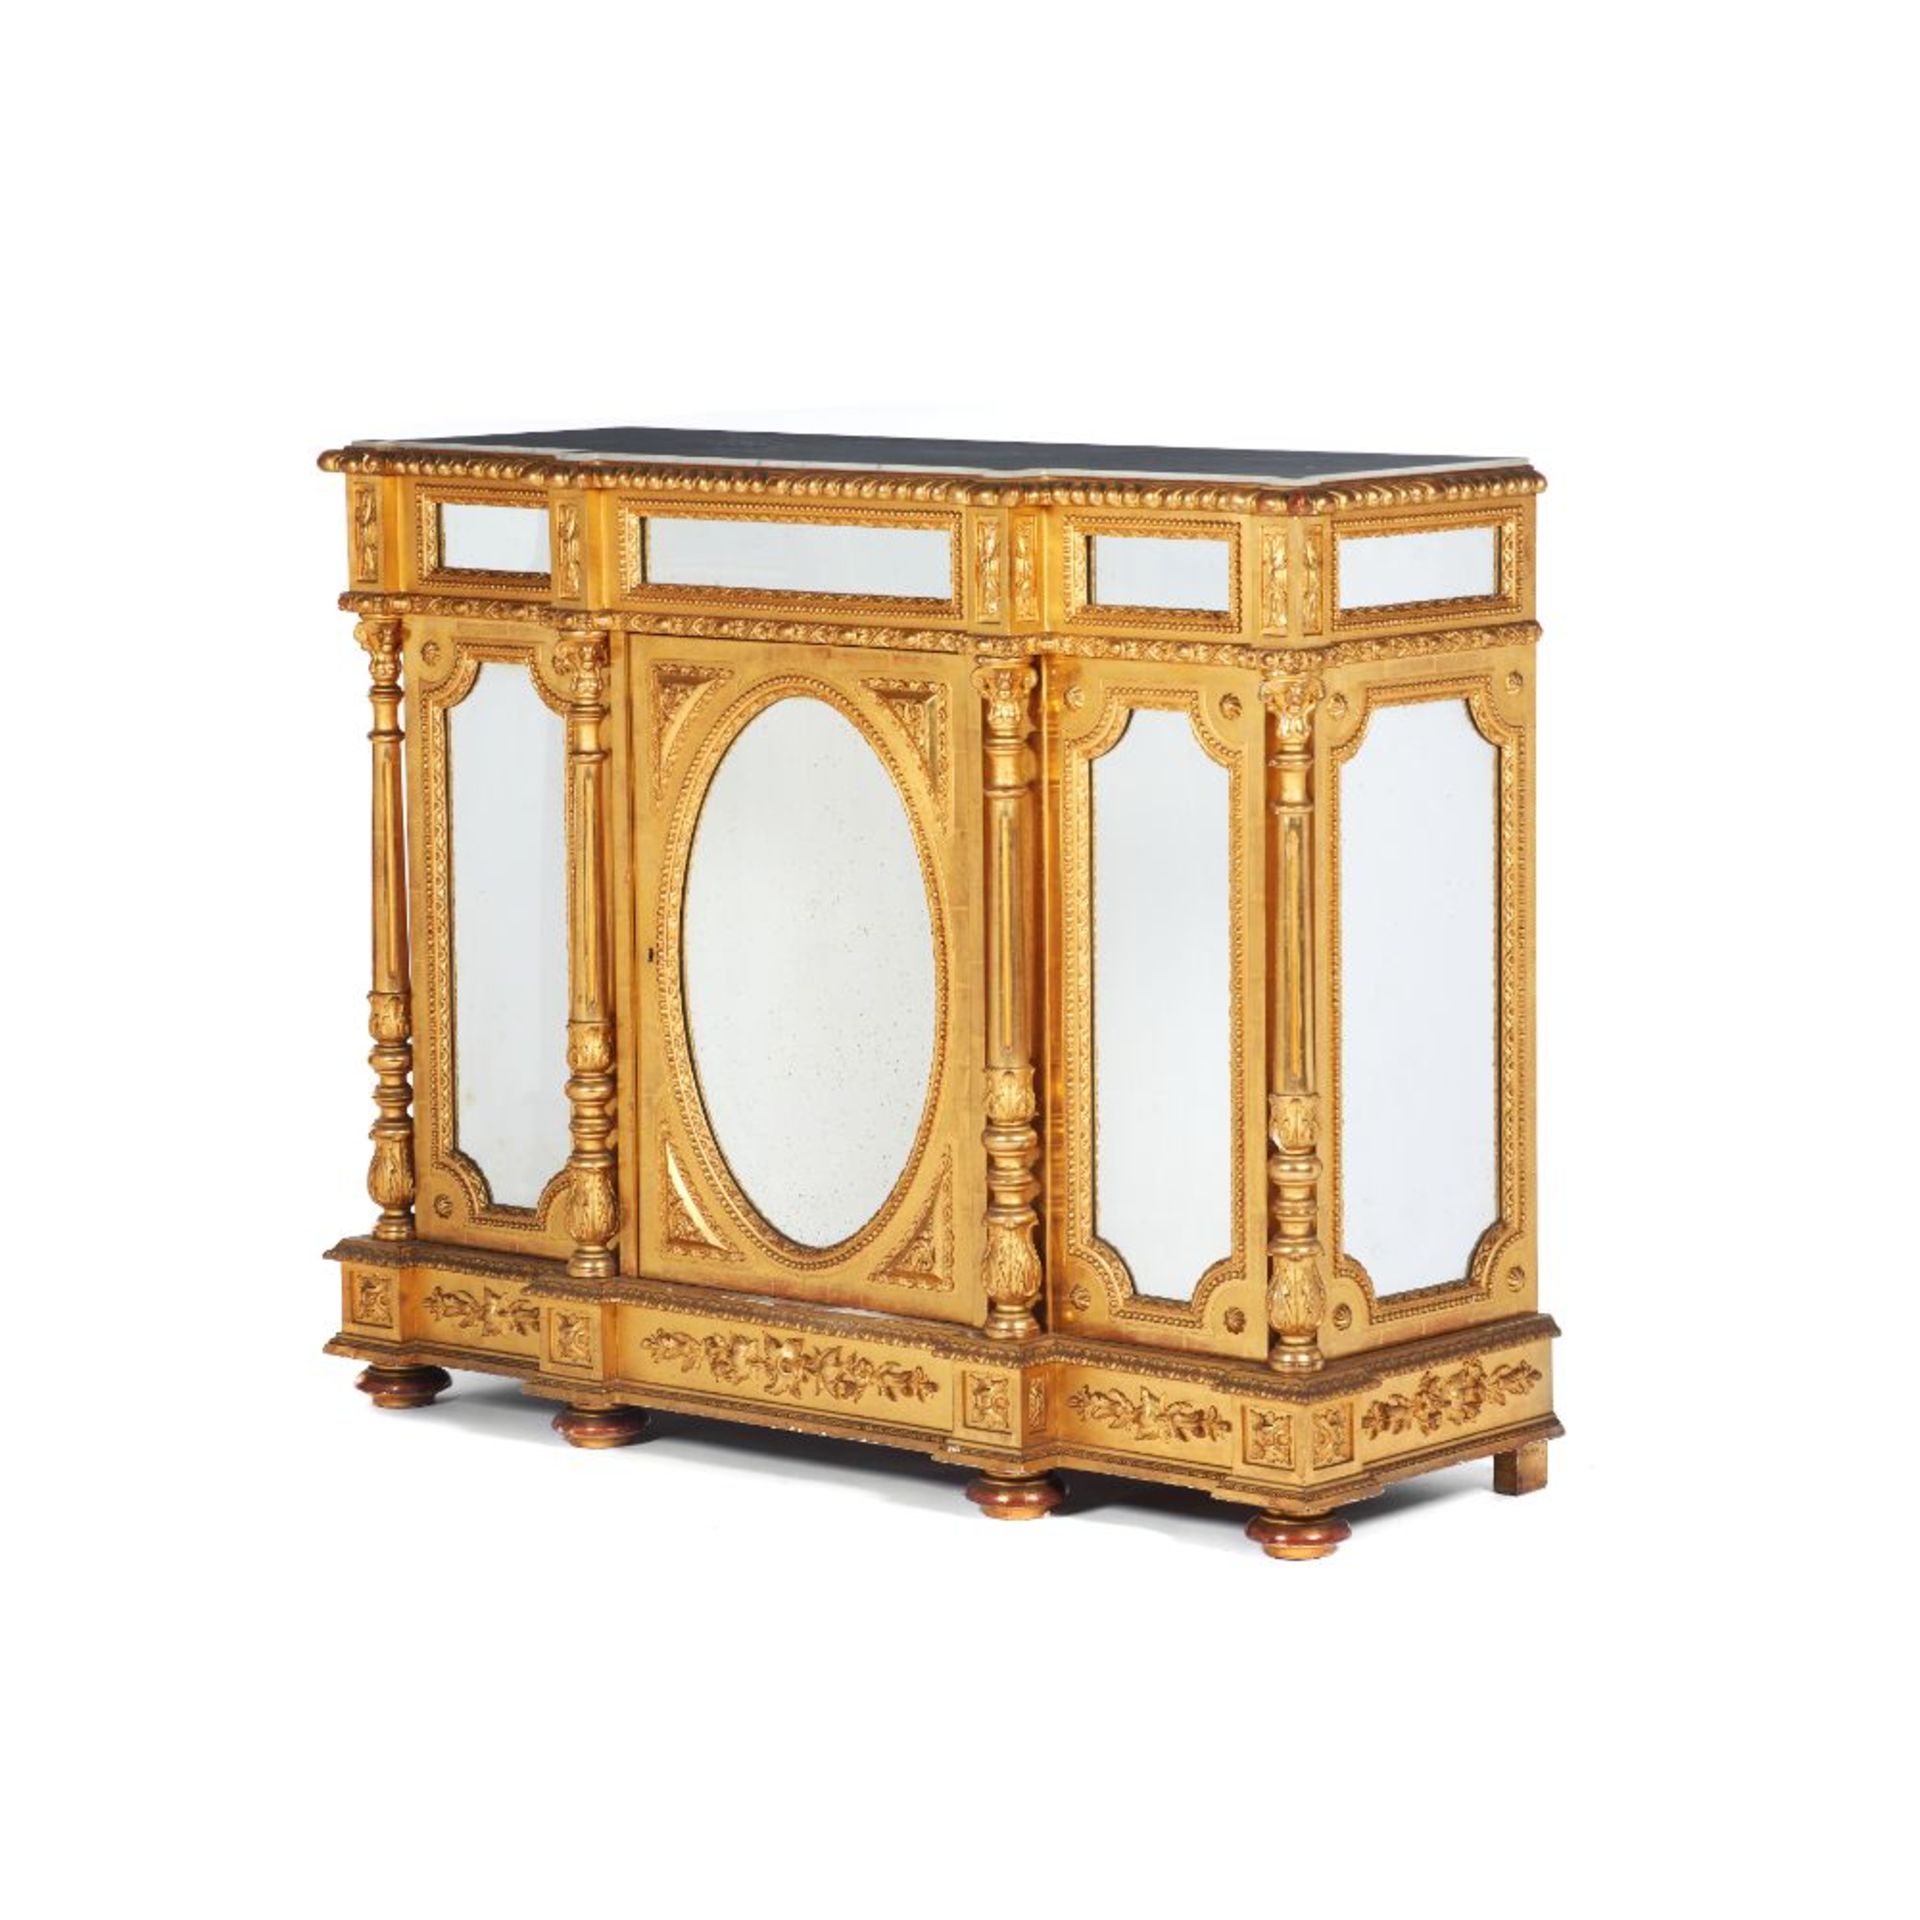 A Napoleon III cabinet, Carved and gilt wood and gesso, Mirrored structure, doors, frontal and